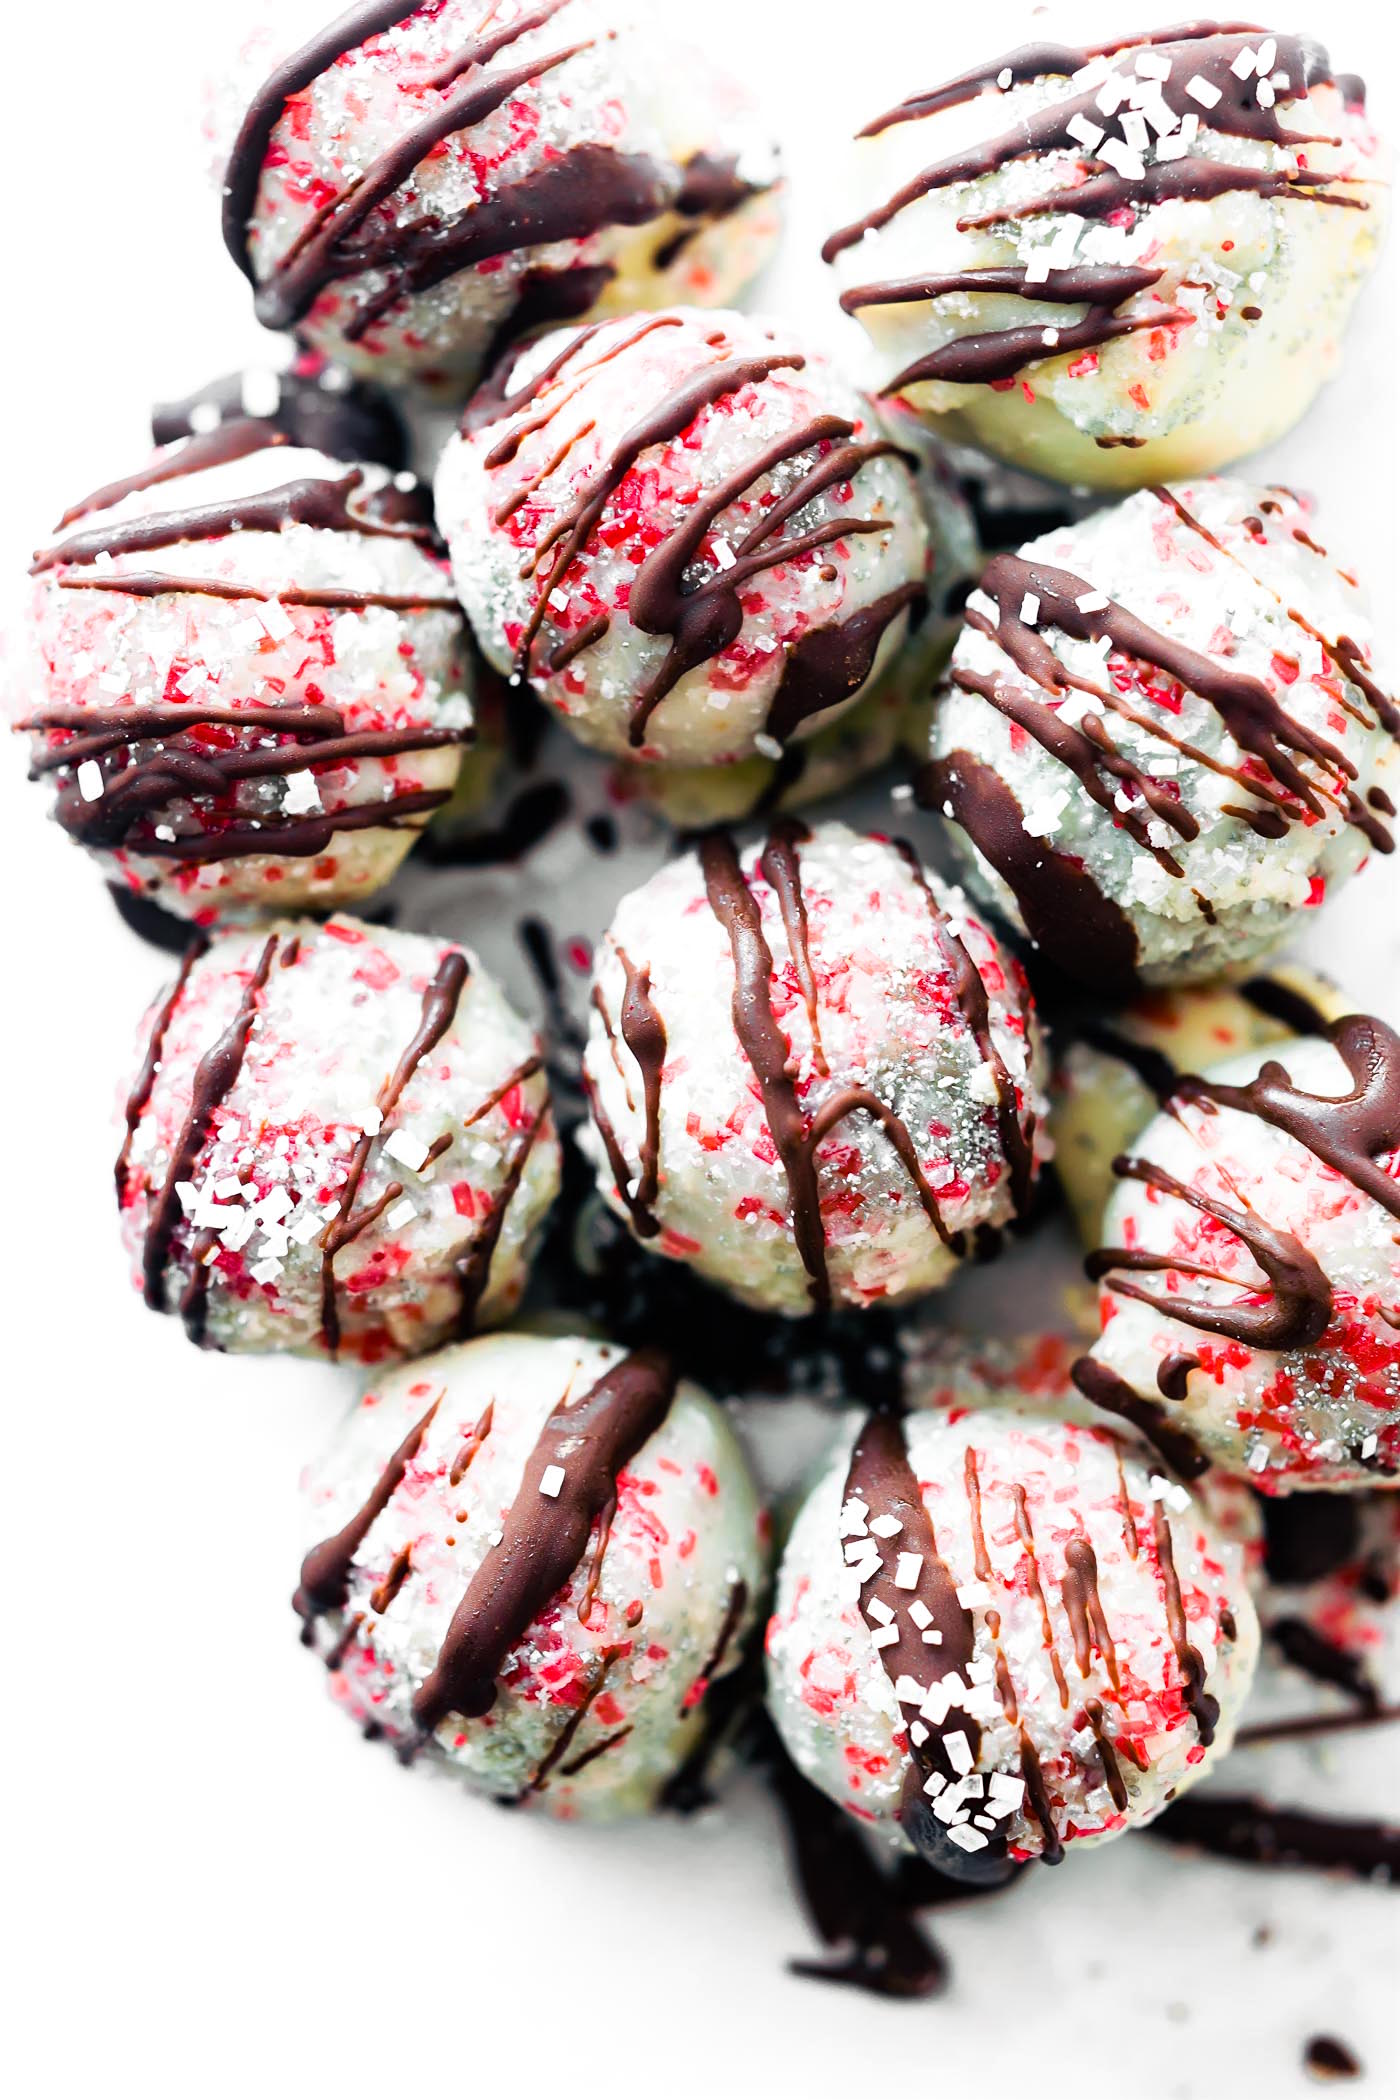 These White Chocolate Peppermint Rum Balls make for easy no bake Holiday dessert! A fun festive dessert made with natural gluten free ingredients; pure dark chocolate and white chocolate, coconut, spice rum, almonds, and peppermint oil. These rum balls are quick to make for parties, family gatherings, and more. Non alcoholic version available!